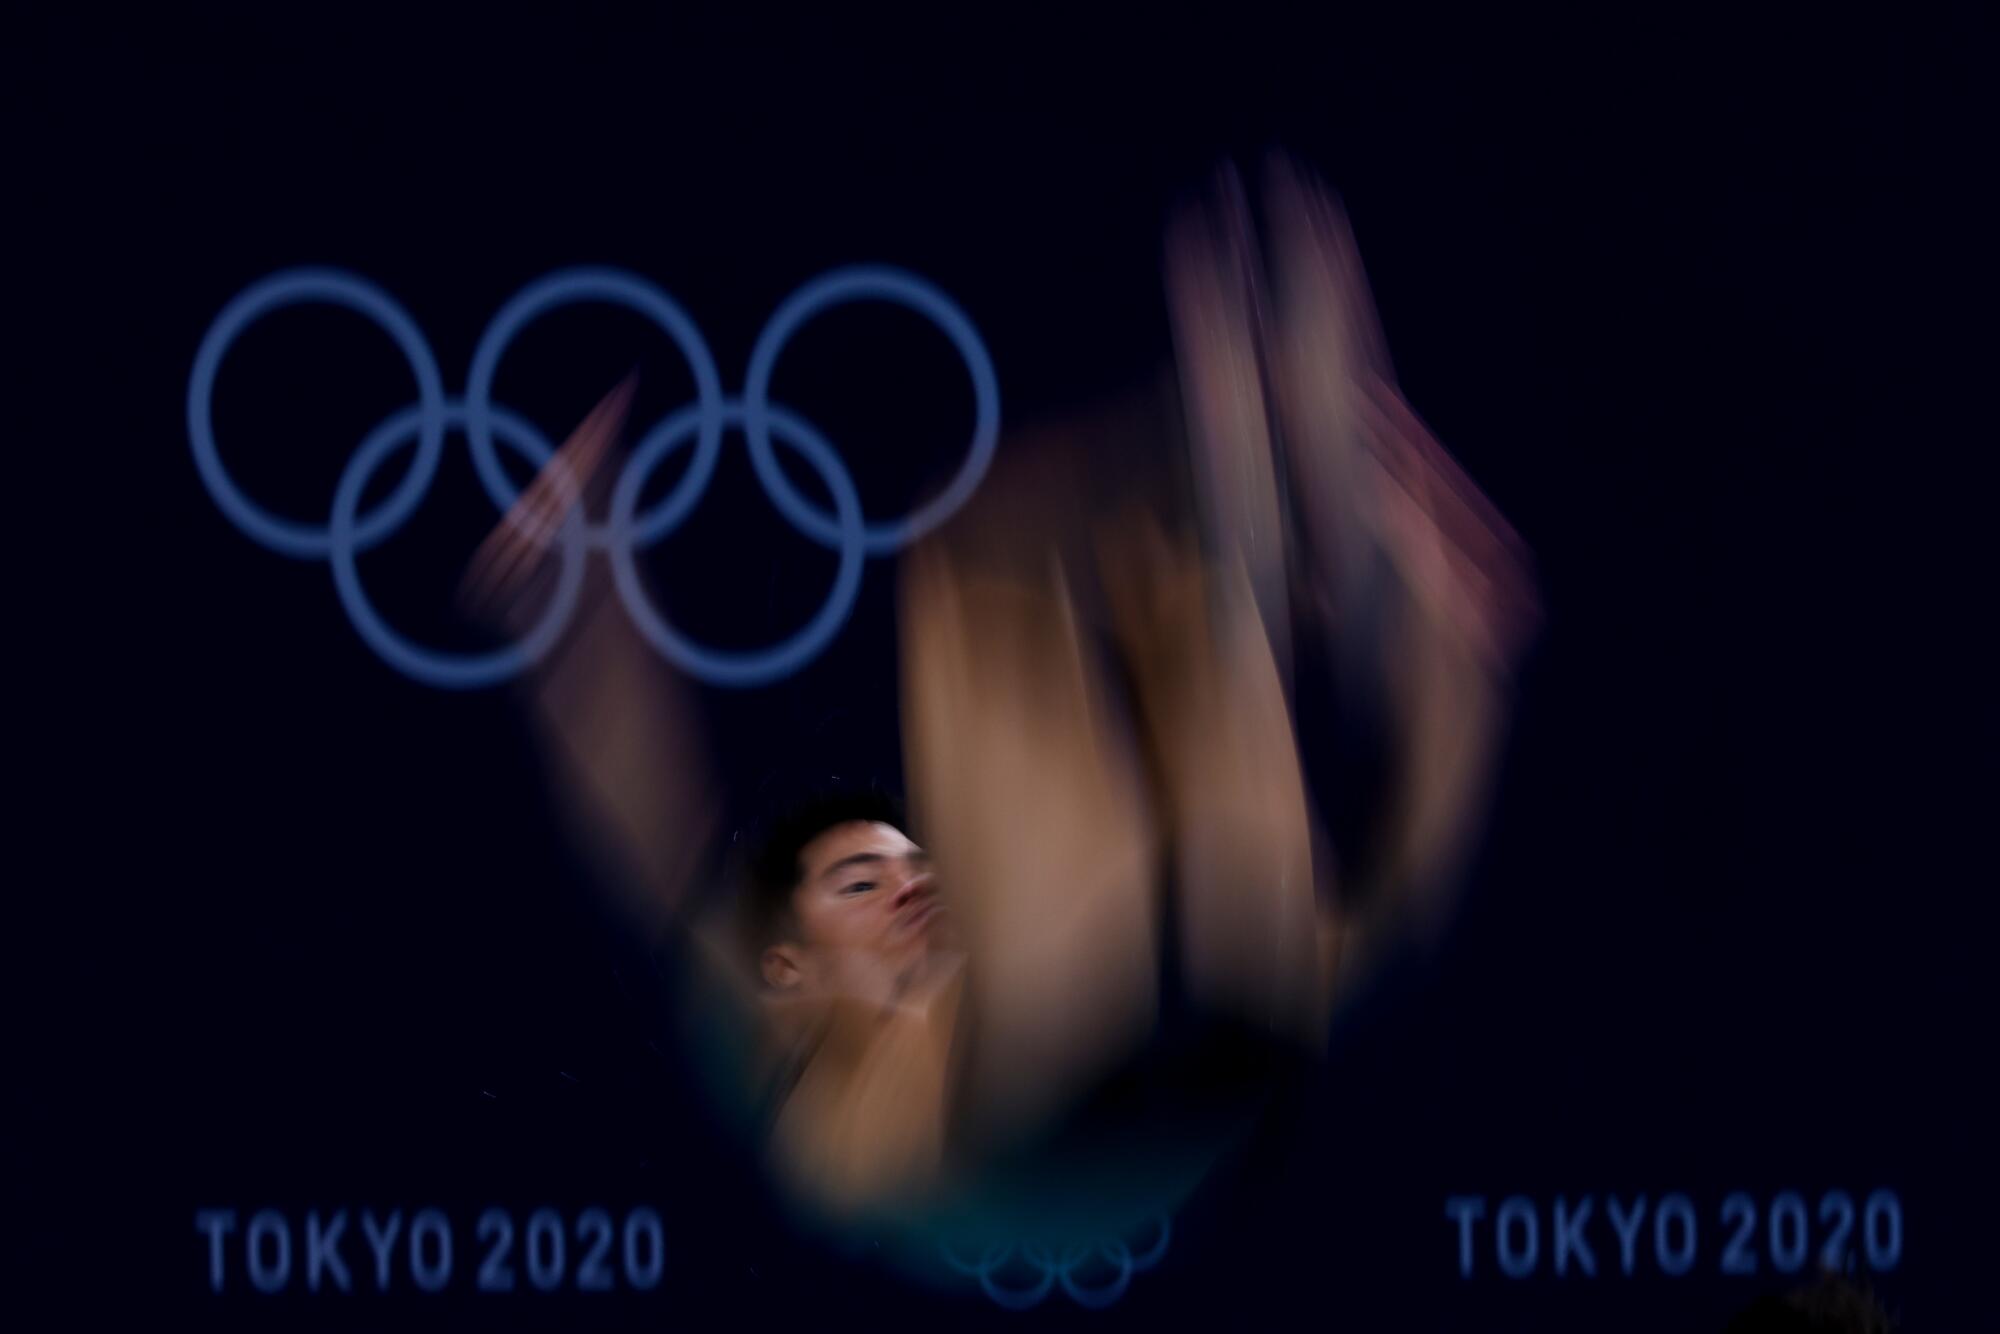 A man's face is clear and the rest of his body a blur, with the Olympic rings in the background.